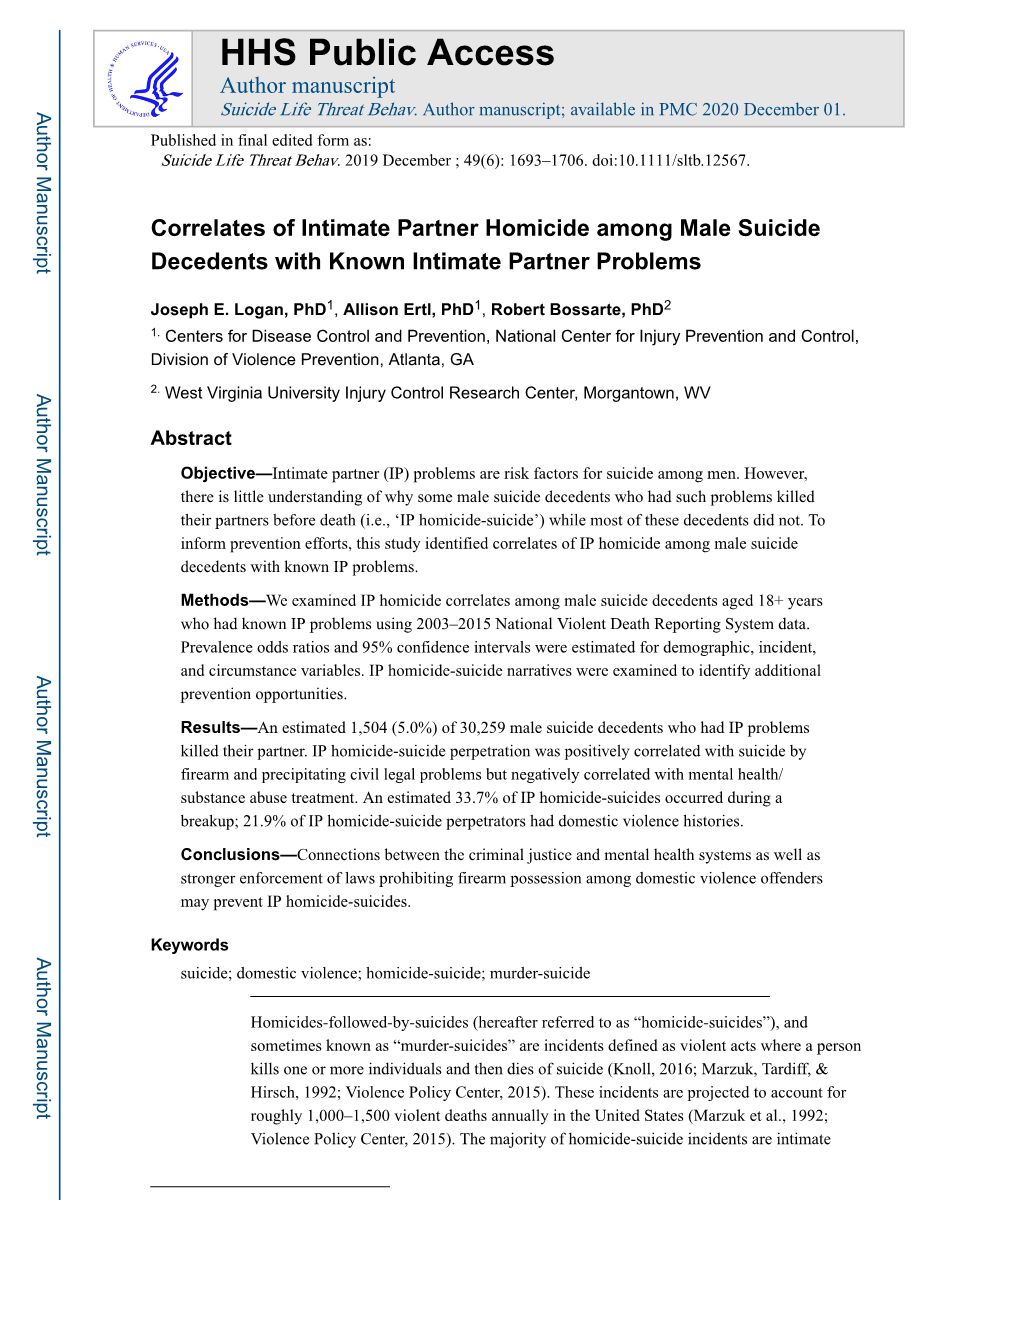 Correlates of Intimate Partner Homicide Among Male Suicide Decedents with Known Intimate Partner Problems